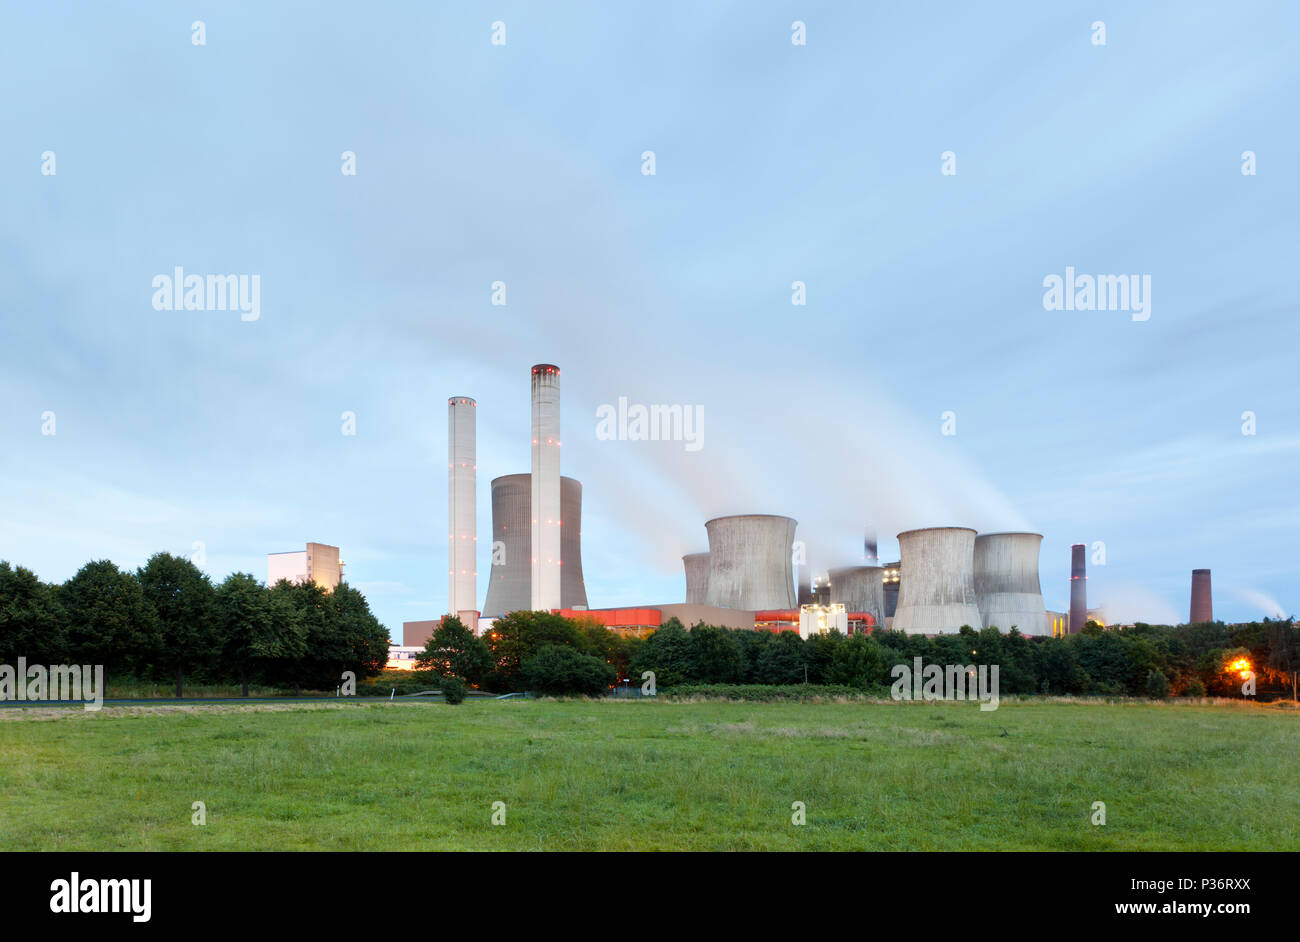 A lignite power station with night blue sky and a lot of steam. Power plant Niederaussem features the tallest cooling tower in the world. Stock Photo